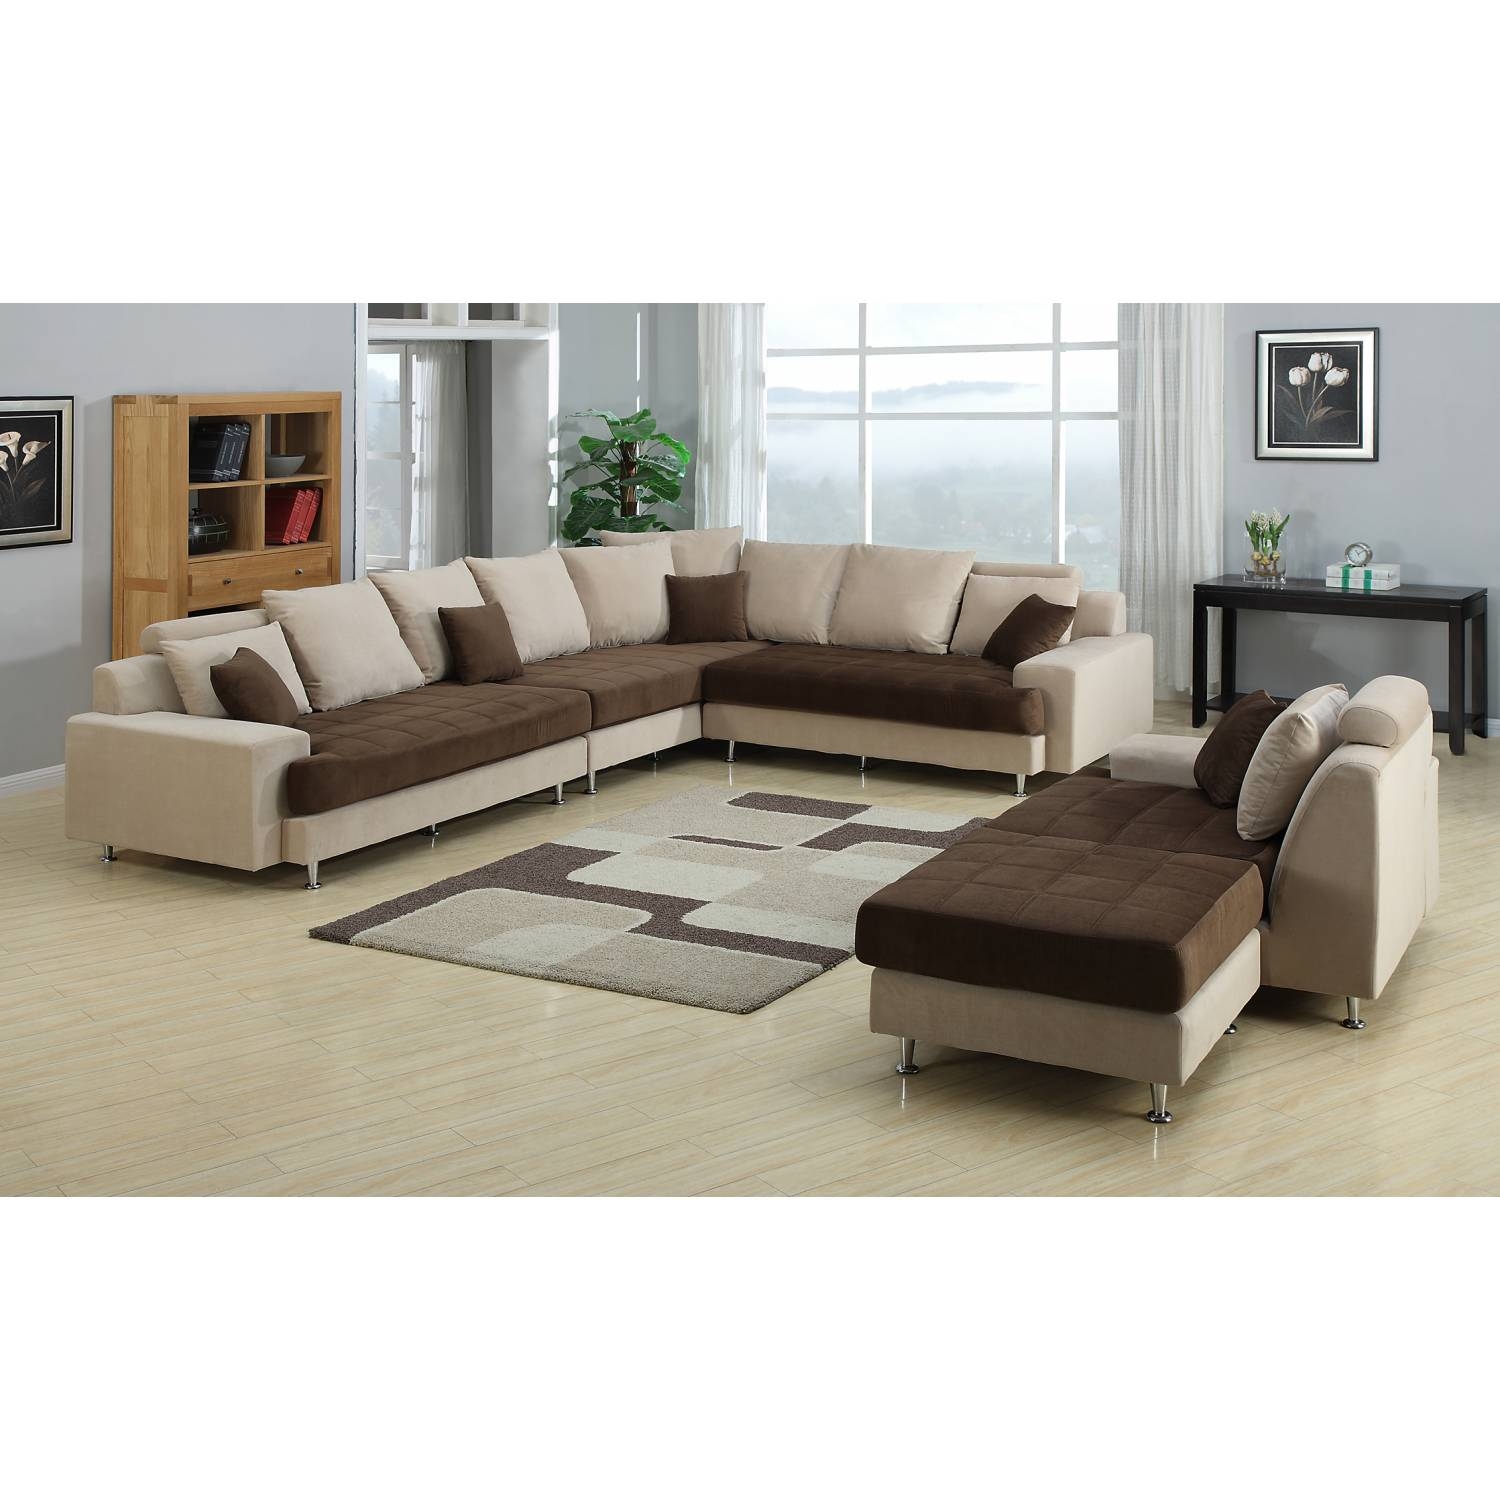 3 pc 2 tone ashley camel and chocolate microfiber upholstered